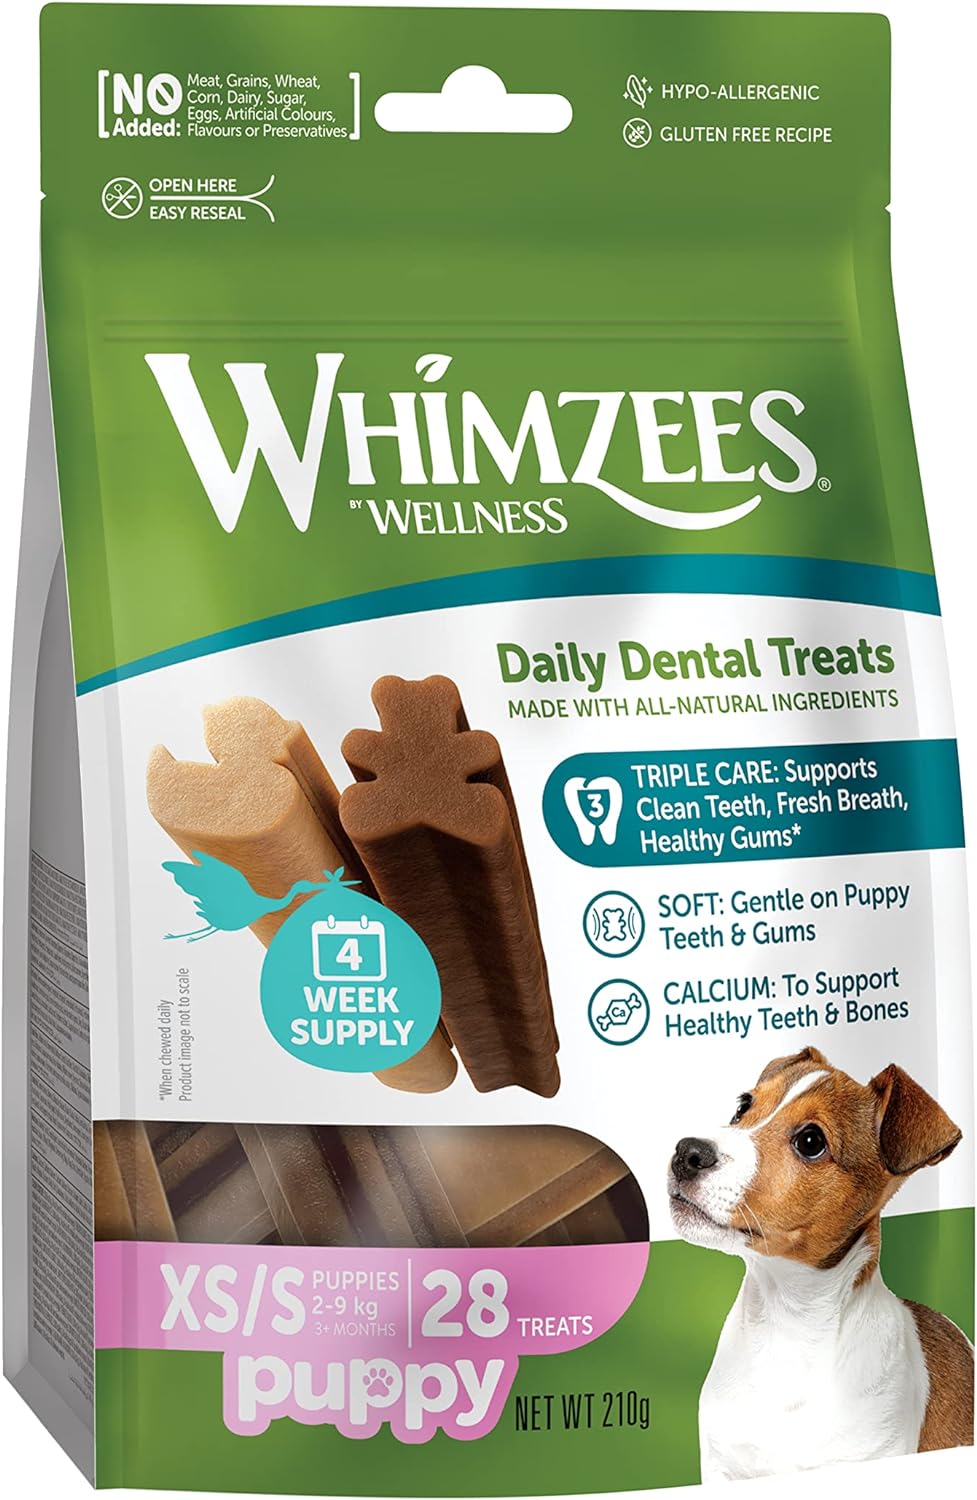 WHIMZEES Puppy Stix, Natural and Grain Free Dog Chews, Puppy Dental Sticks, 28 Pieces, Size XS/S